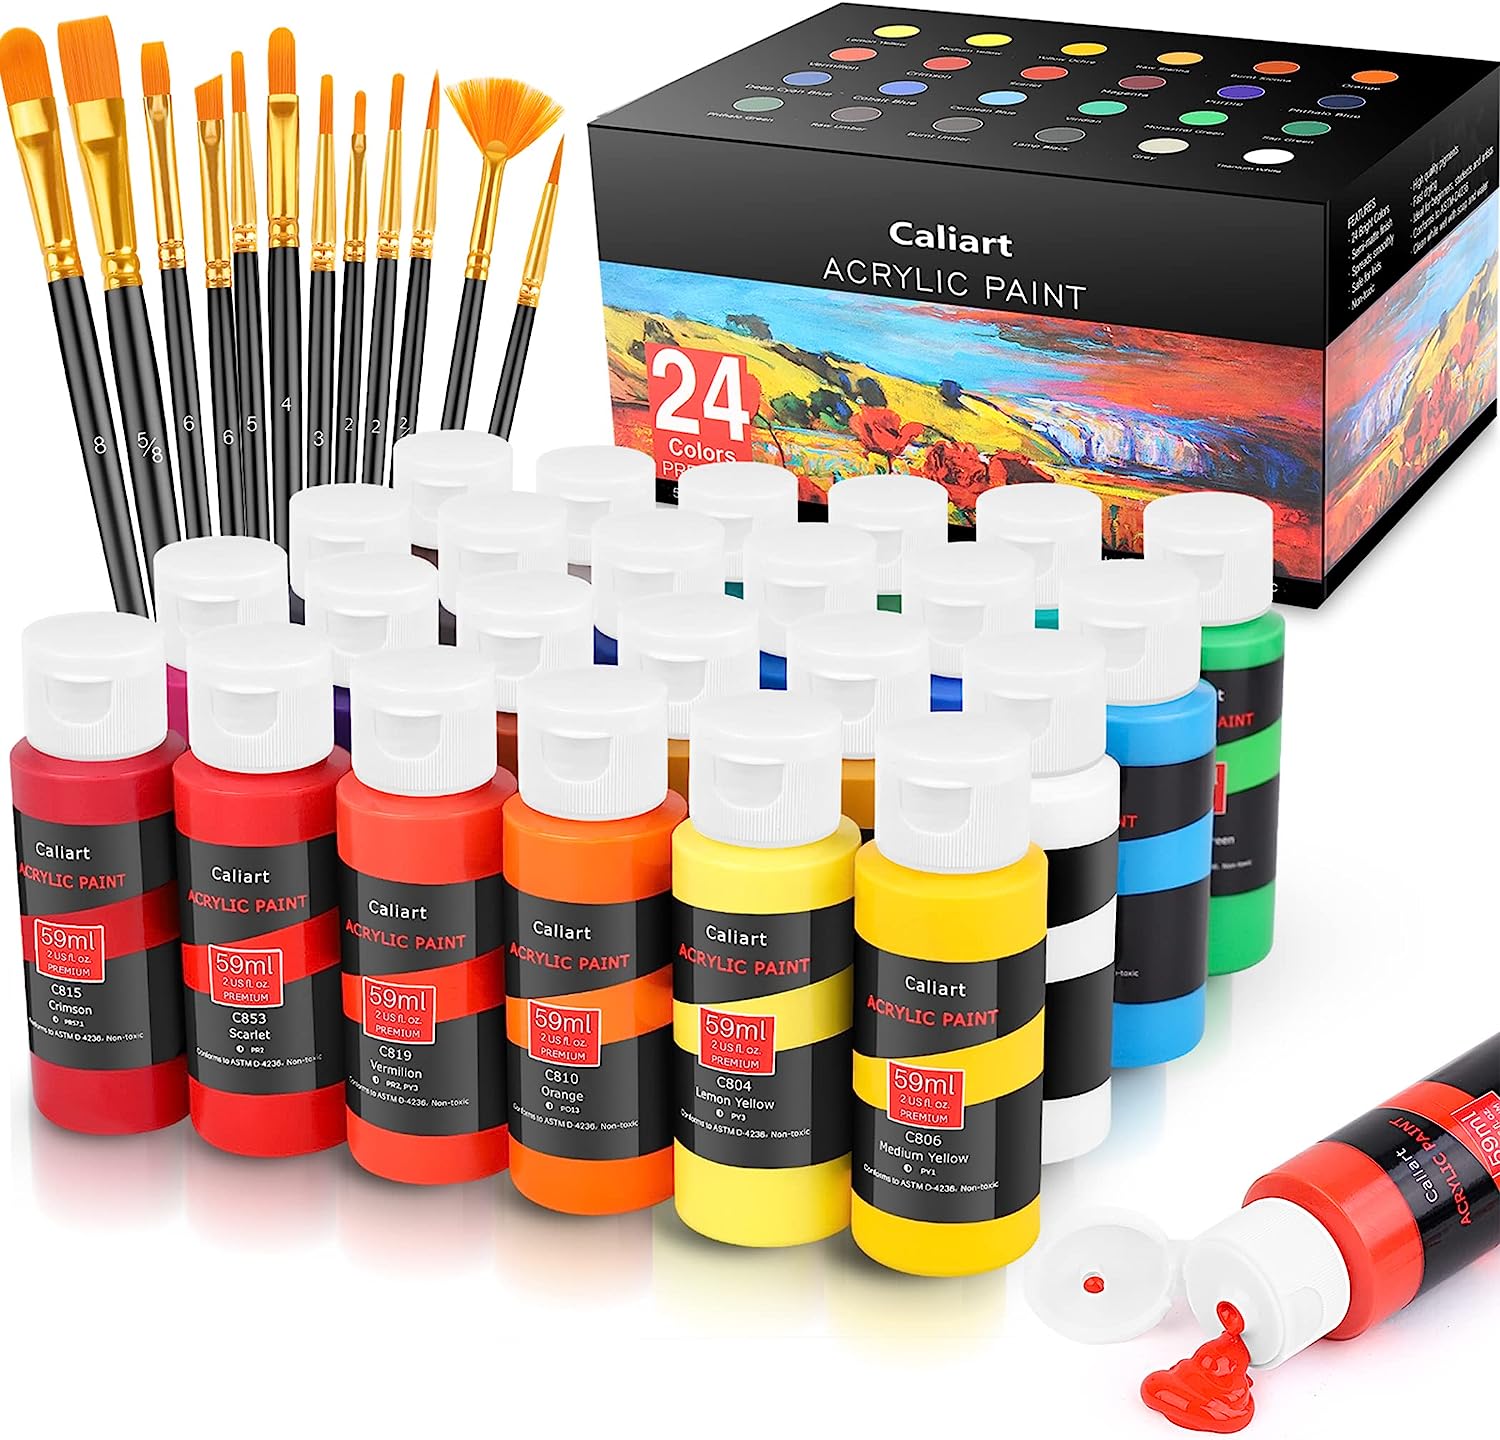 Caliart Acrylic Paint Set with 12 Brushes, 24 Colors [...]